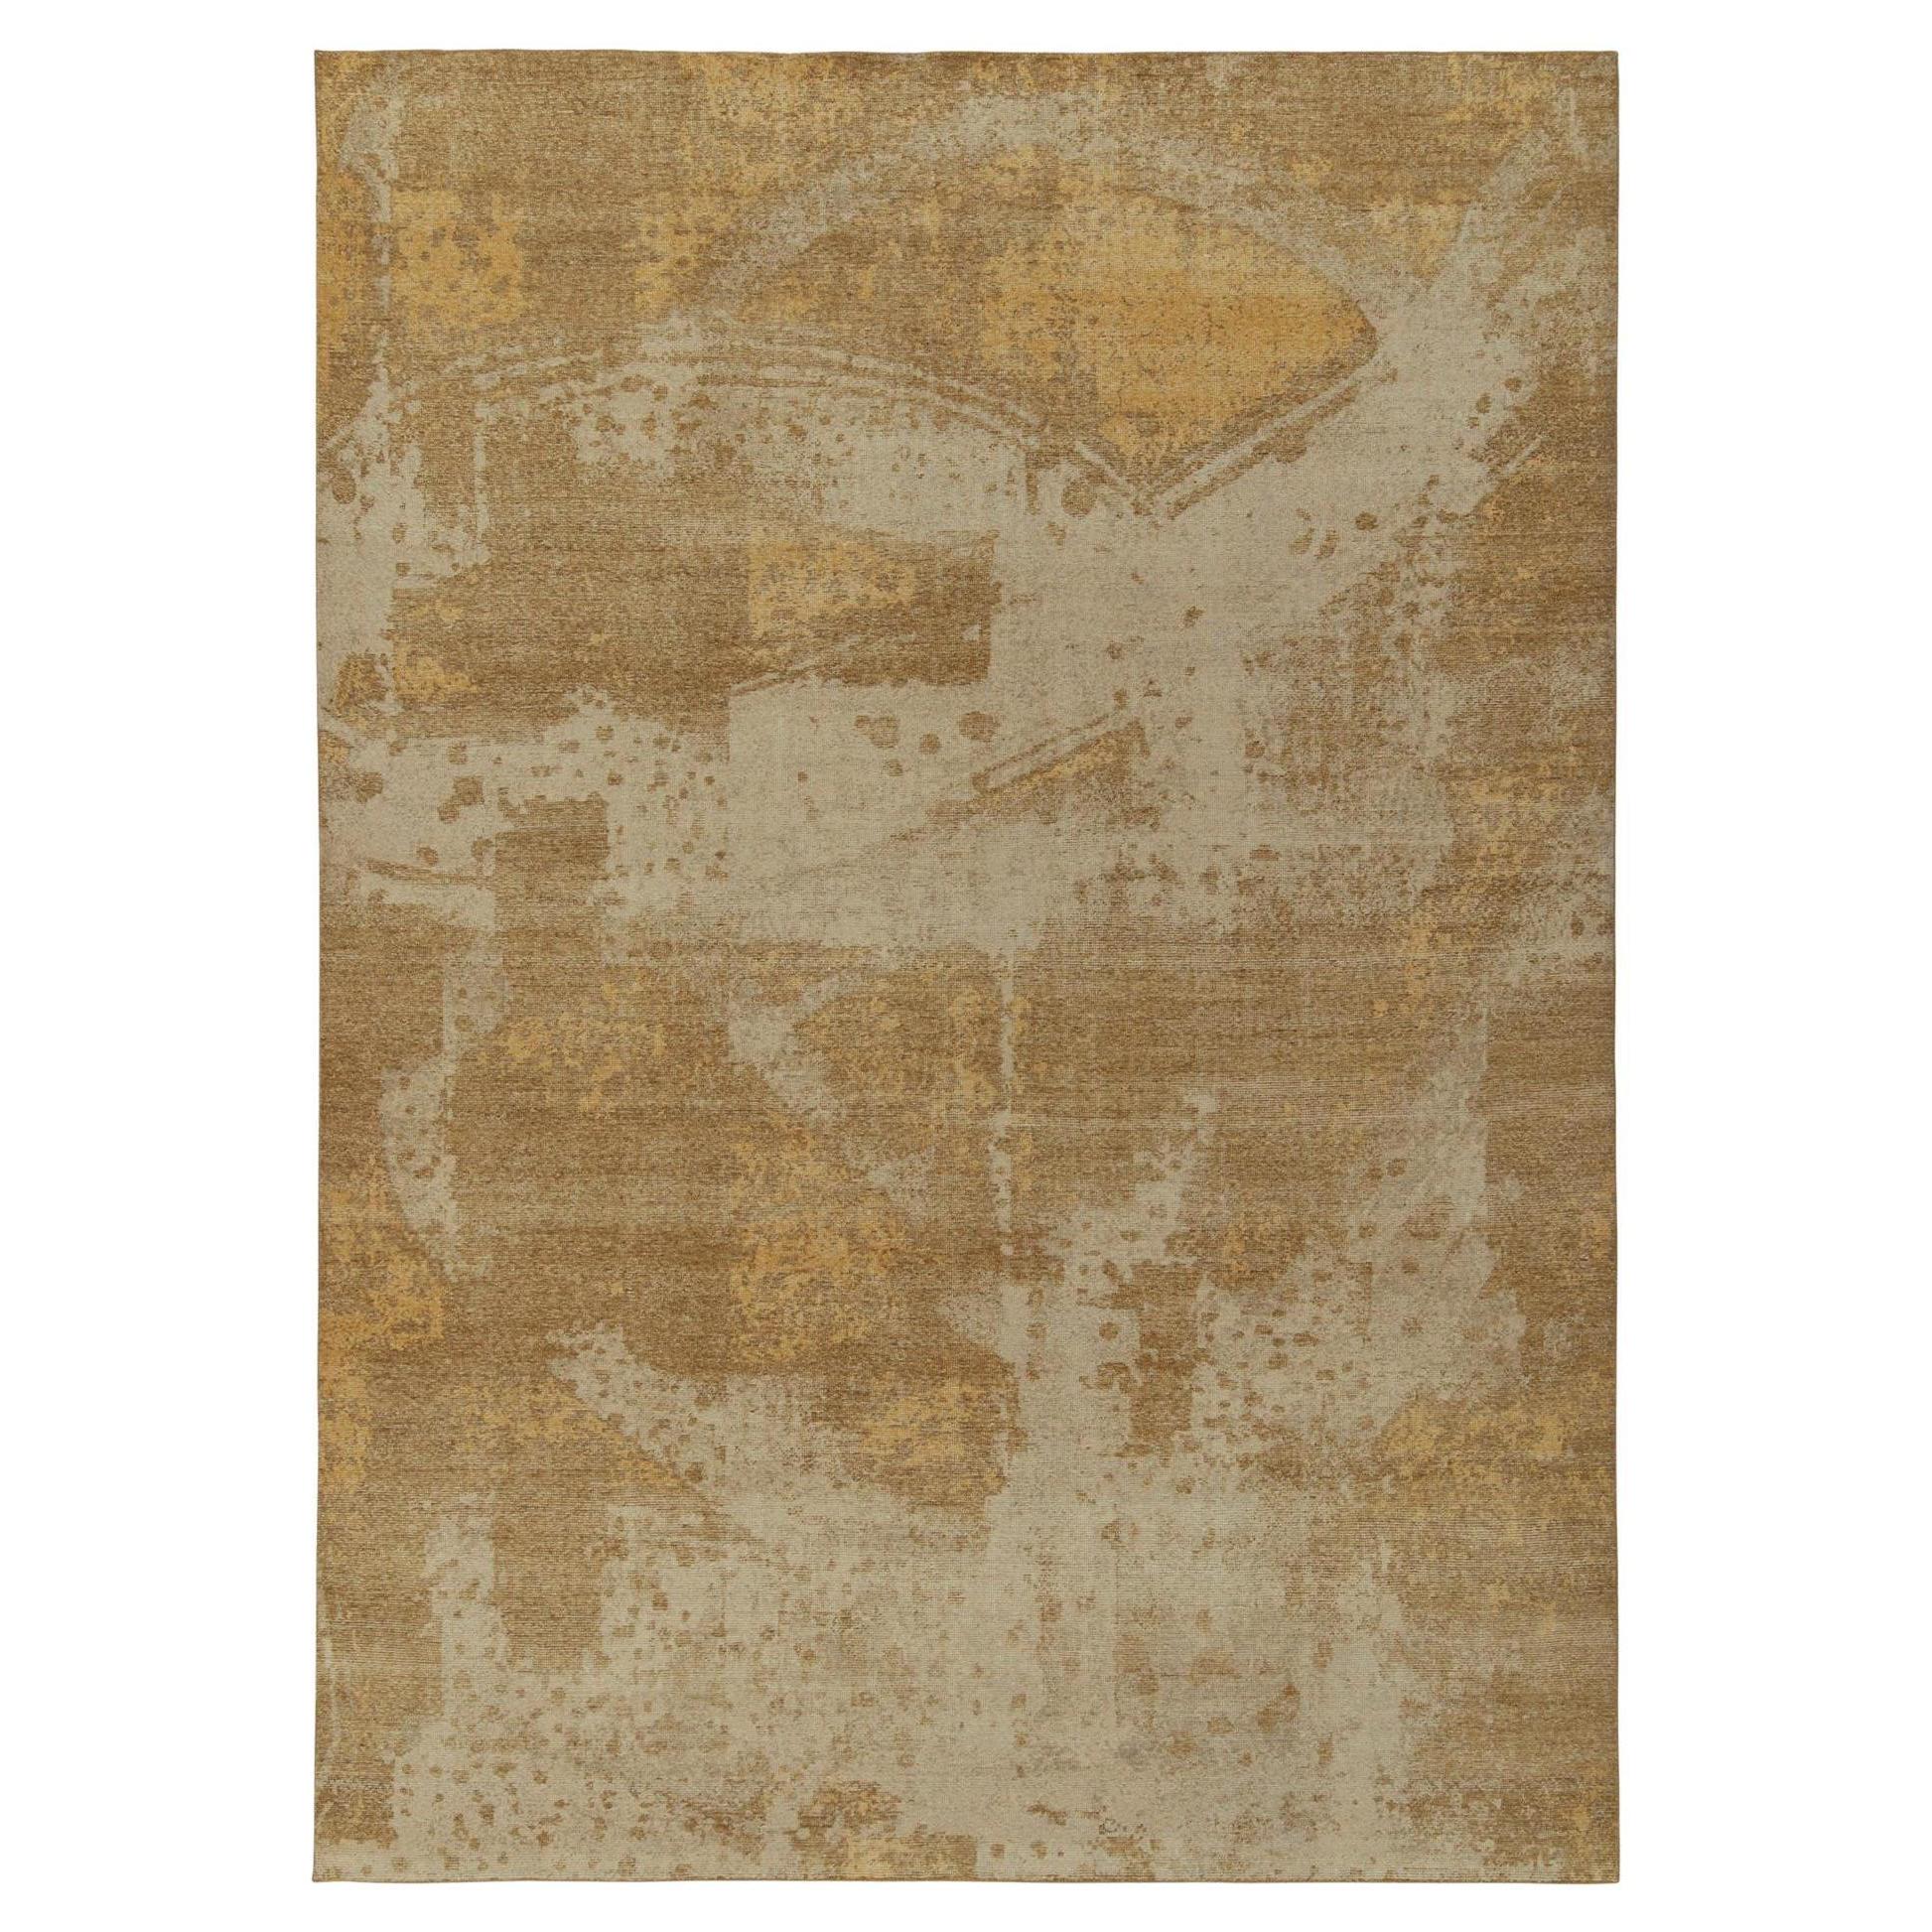 Rug & Kilim’s Distressed Style Abstract Rug in Beige, Ochre Patterns